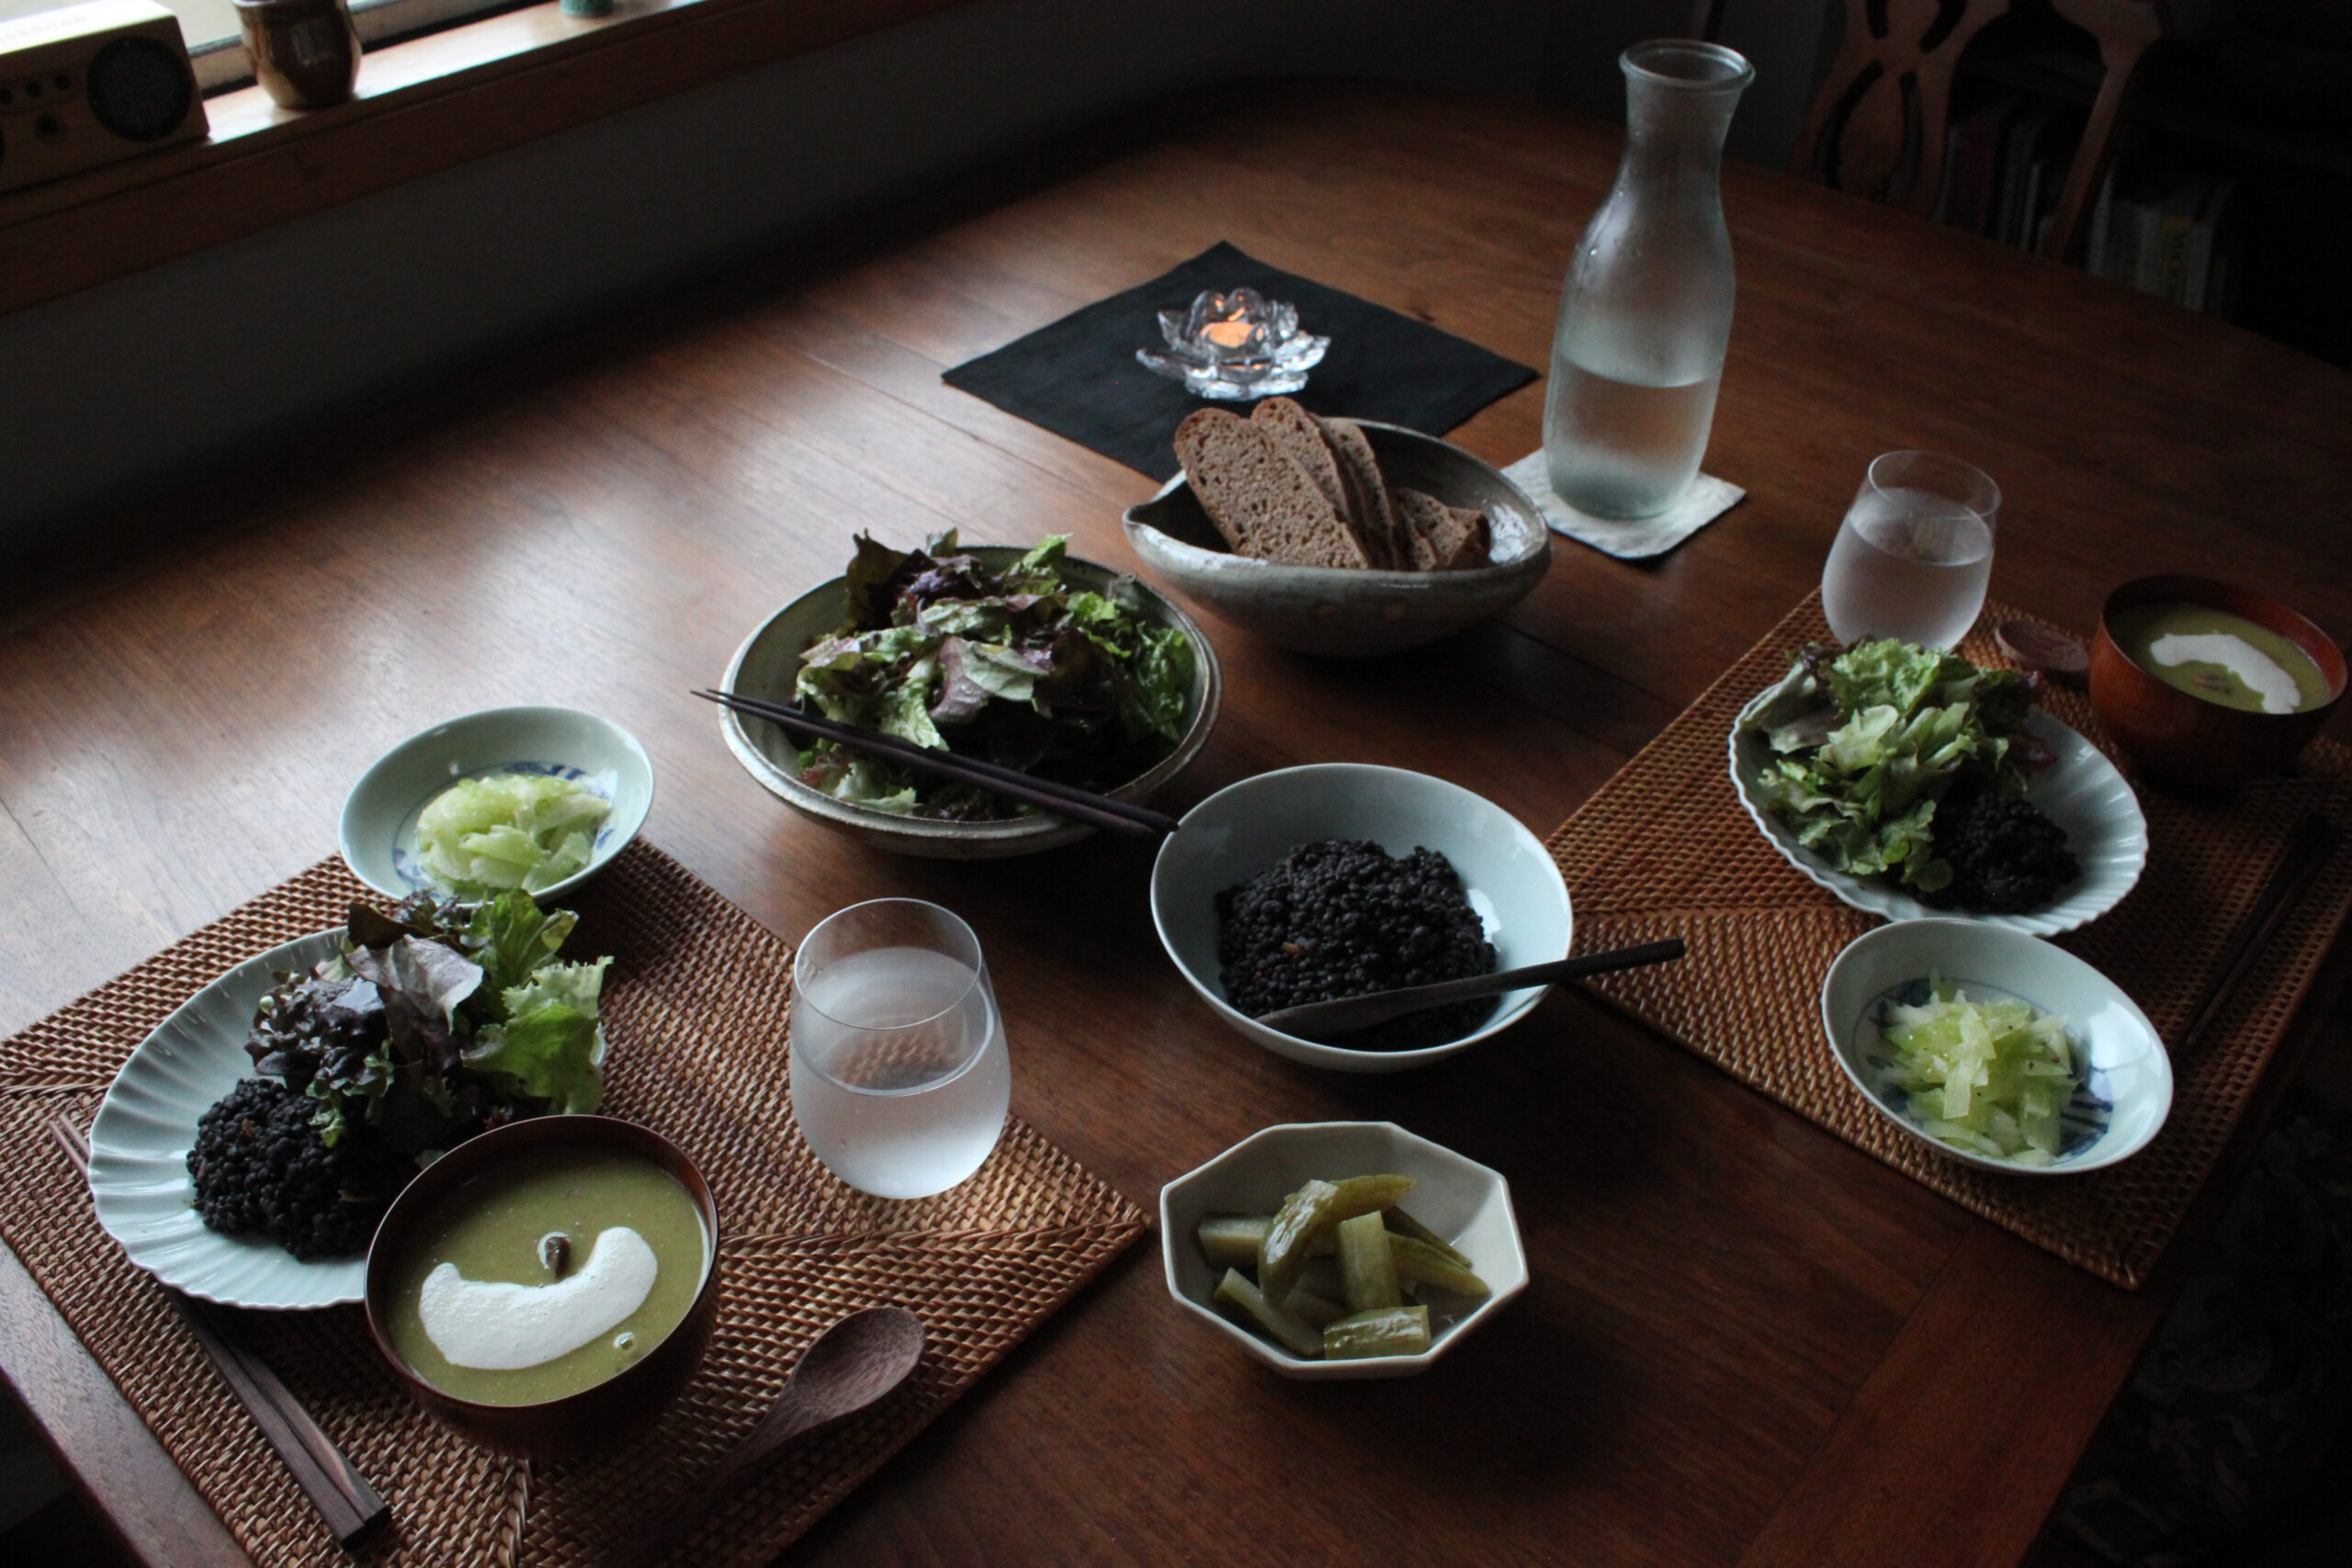 Sunday dinner with sourdough bread, soup, legume, and salads